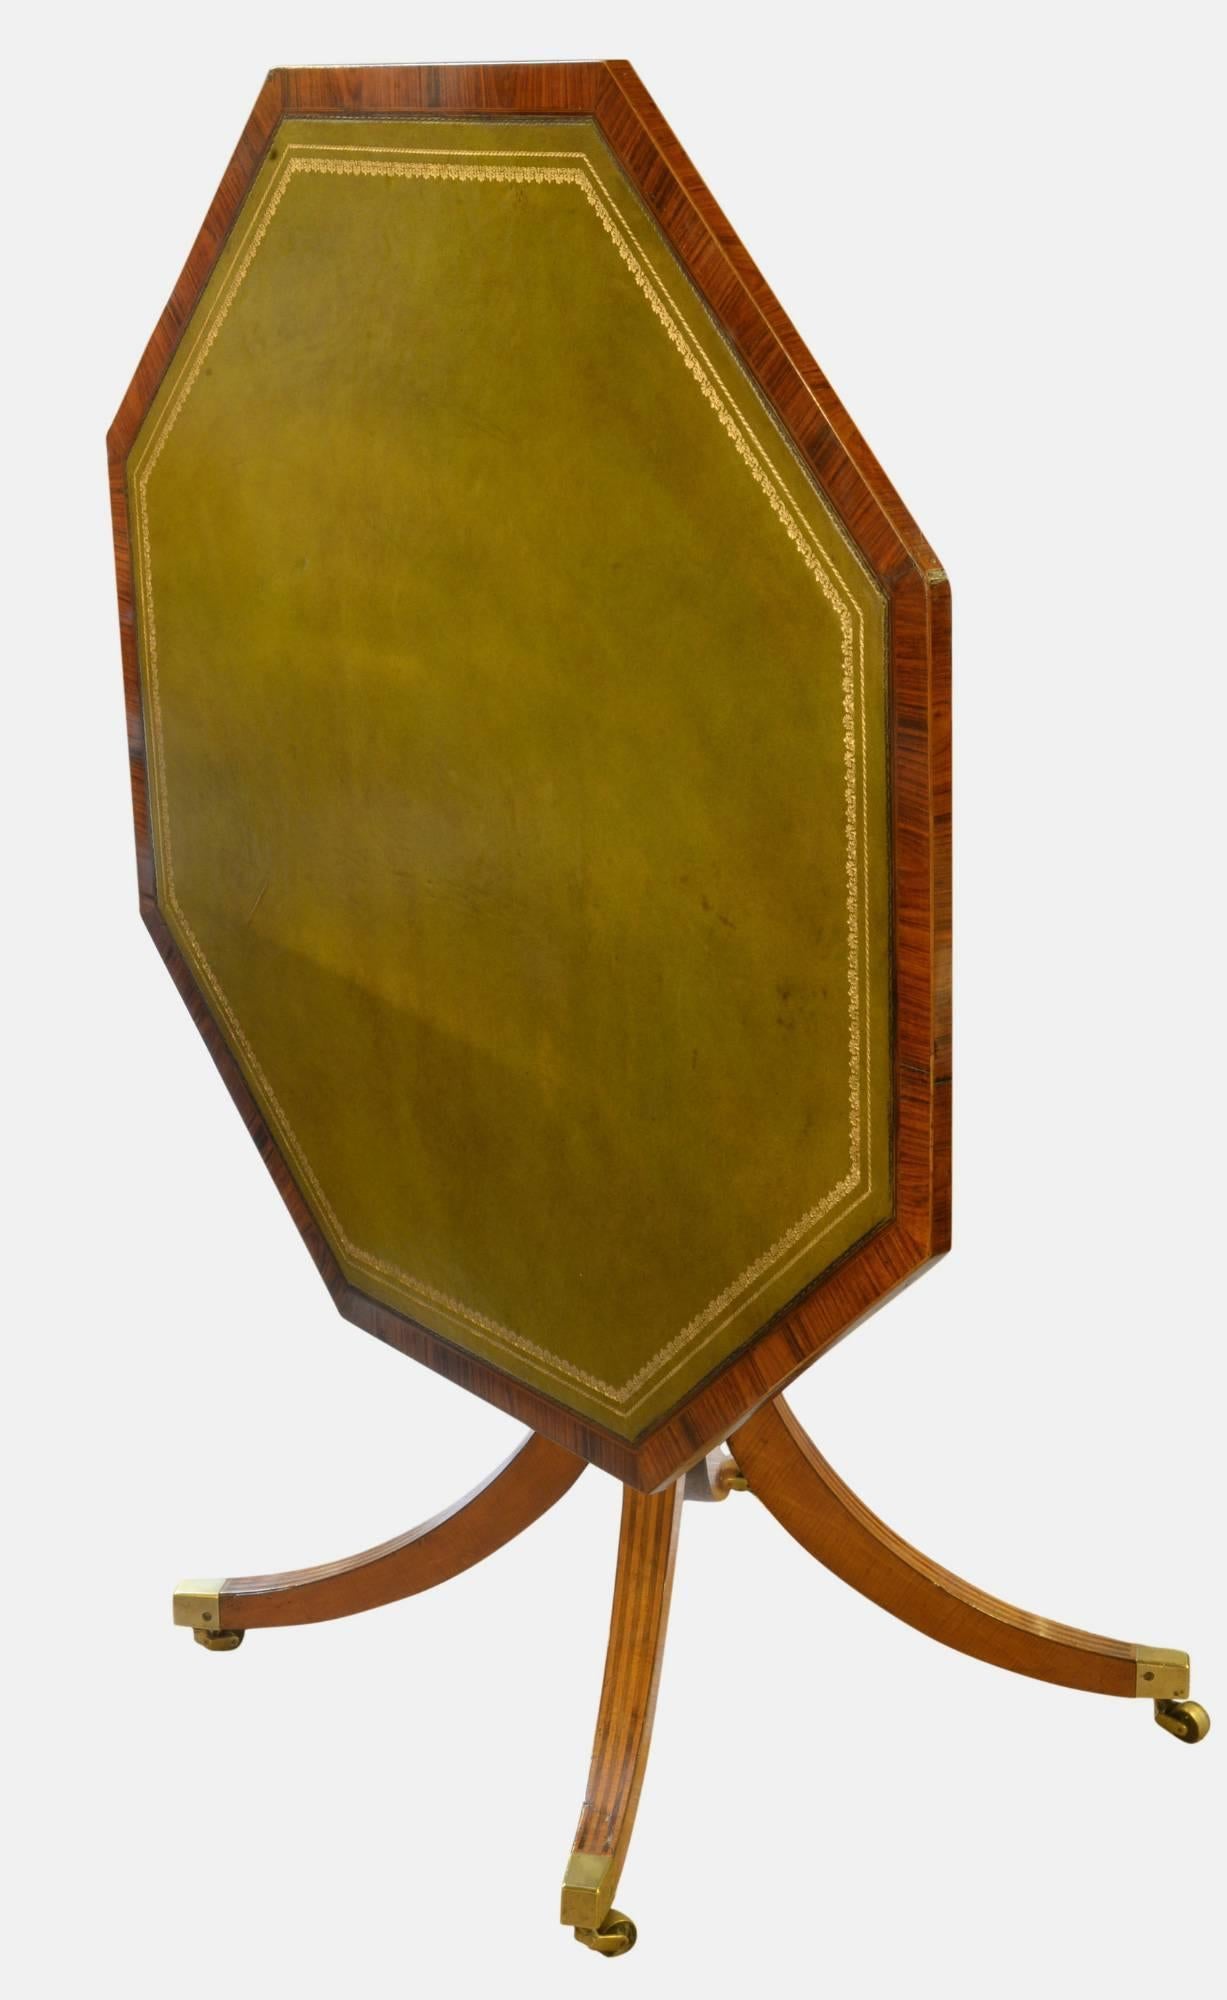 A George III satinwood and rosewood octagonal centre table with replaced leather inset top on splayed legs with brass castors, 
circa 1790.
Dimensions: 70cm (27.6